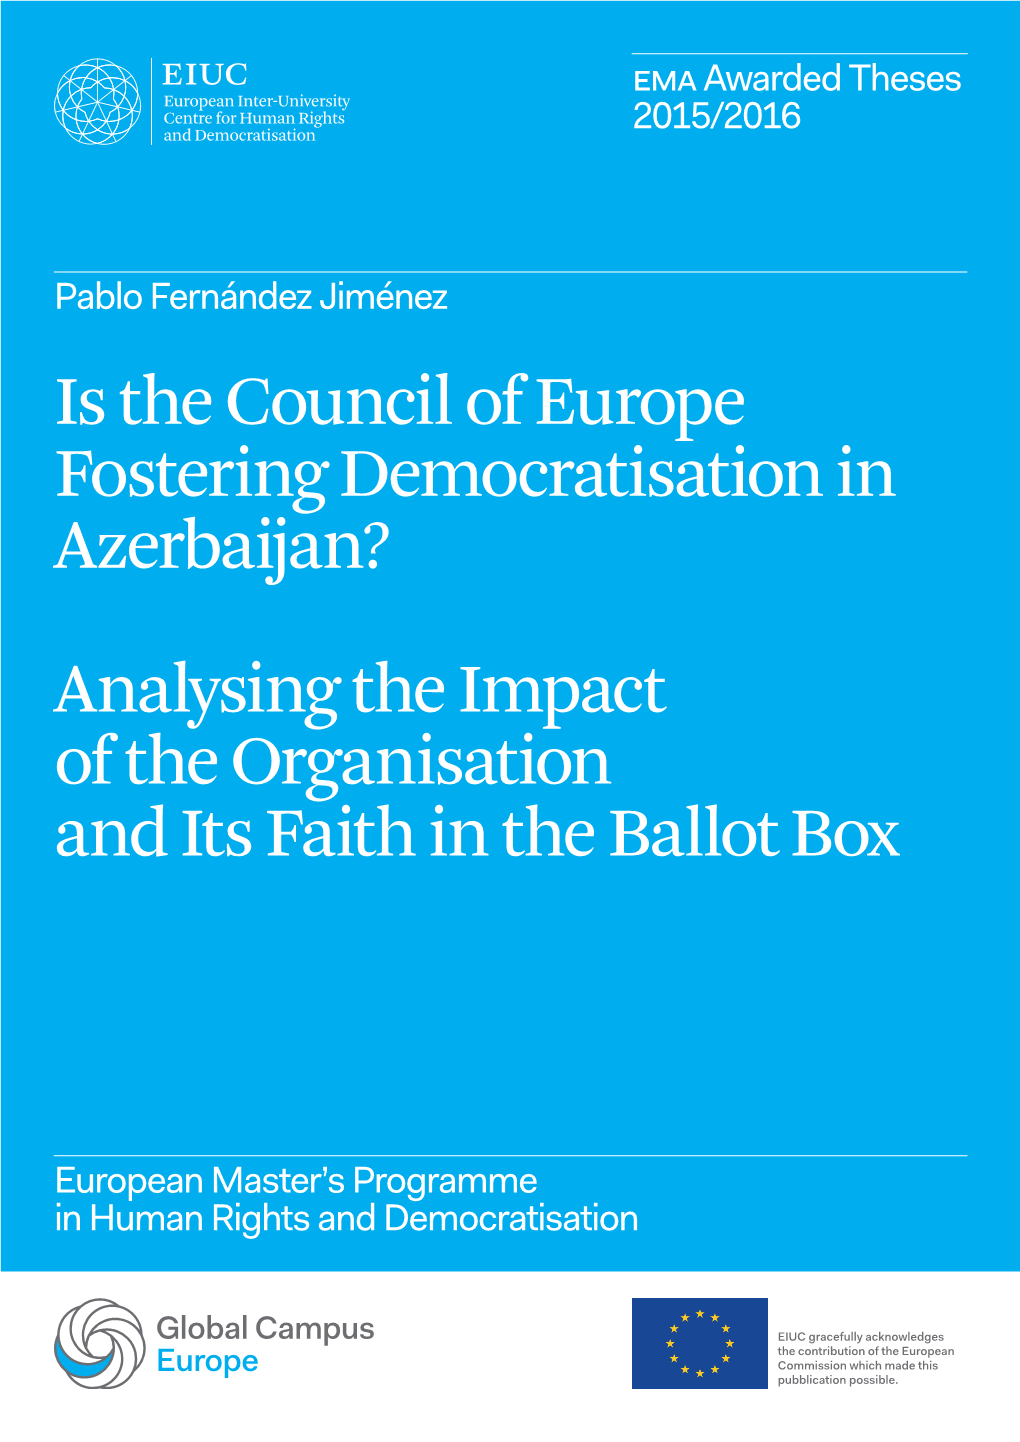 Is the Council of Europe Fostering Democratisation in Azerbaijan?